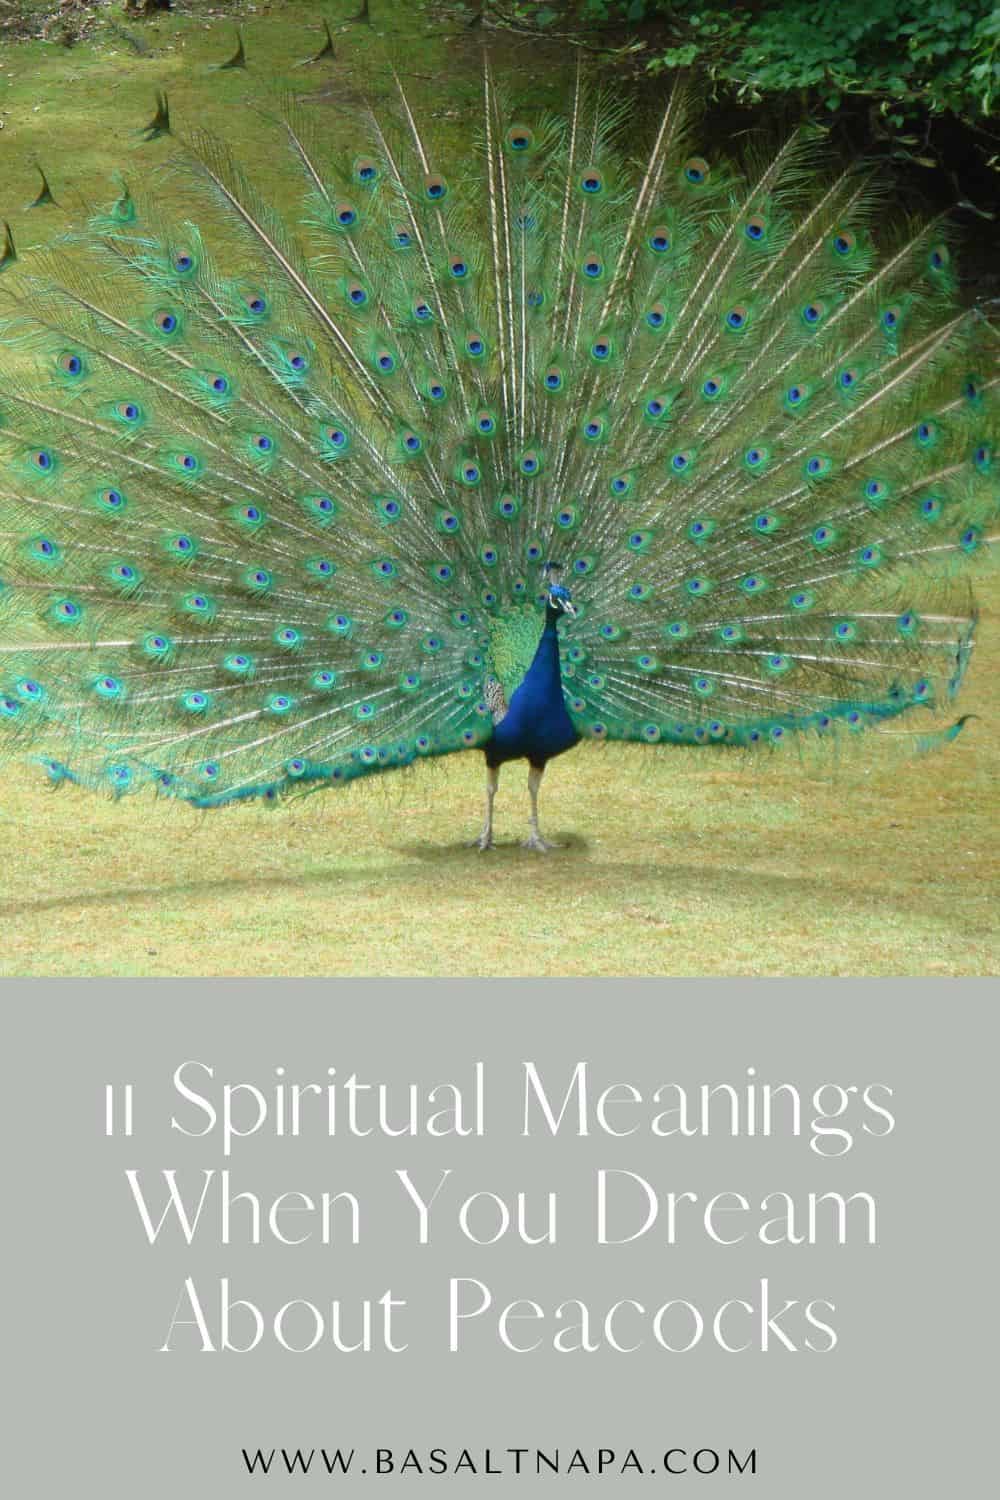 What does it mean when you dream about peacocks?